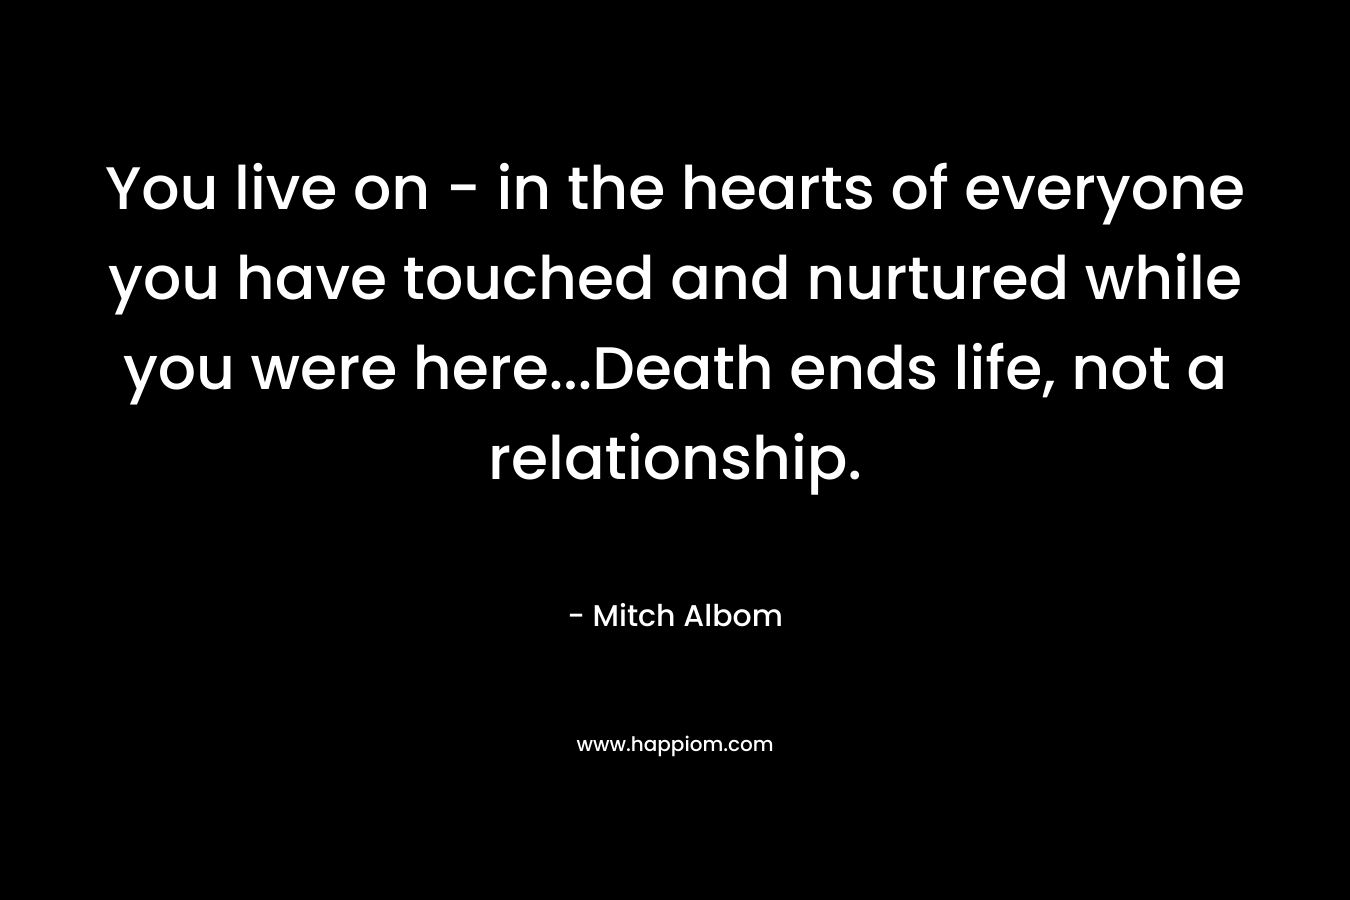 You live on – in the hearts of everyone you have touched and nurtured while you were here…Death ends life, not a relationship. – Mitch Albom